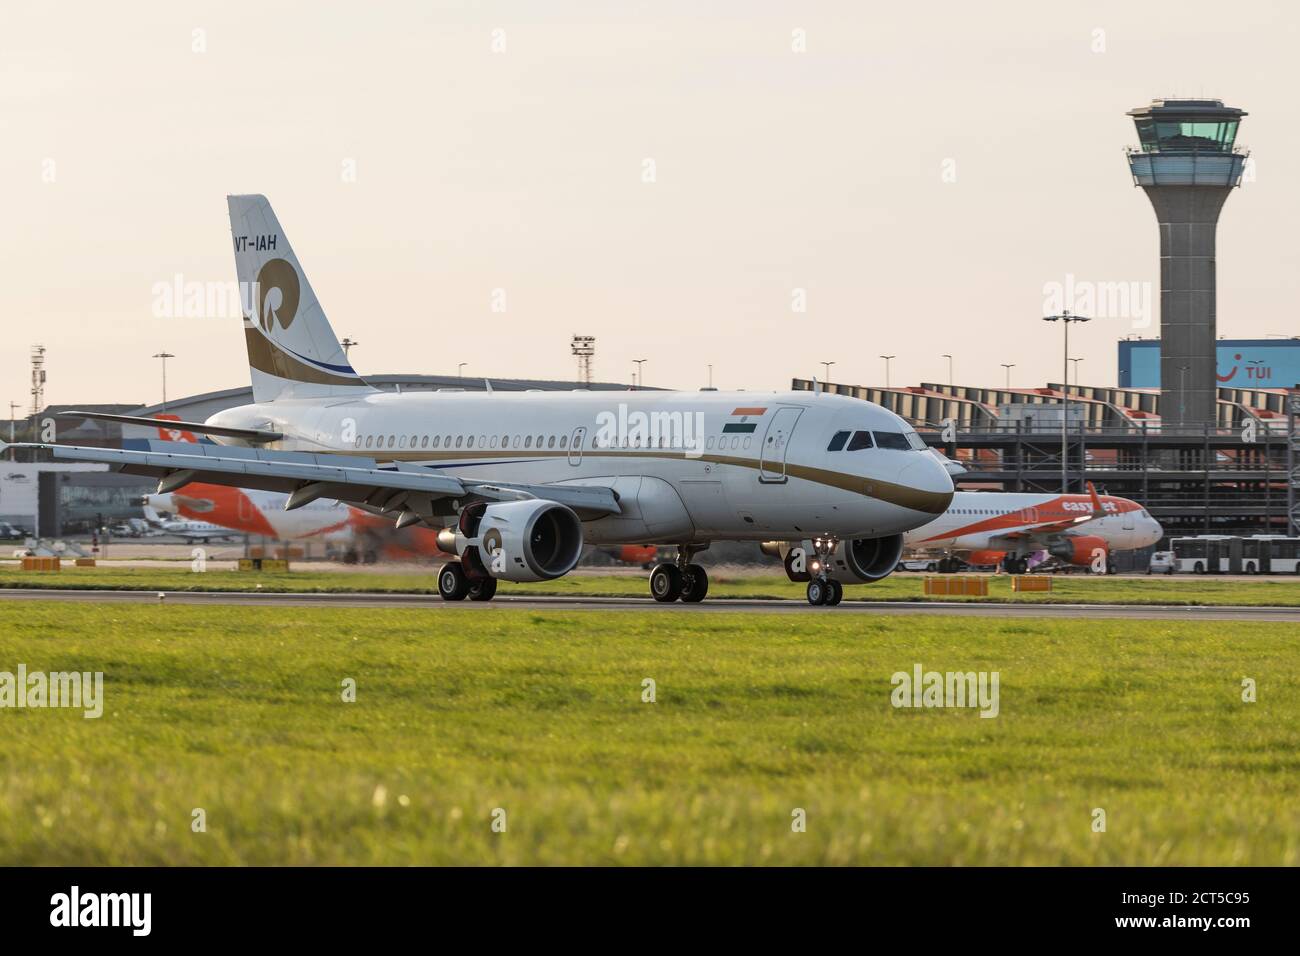 Reliance Industries Airbus A319 ACJ landing on September 18th 2020 at London Luton Airport, Bedfordshire, UK Stock Photo